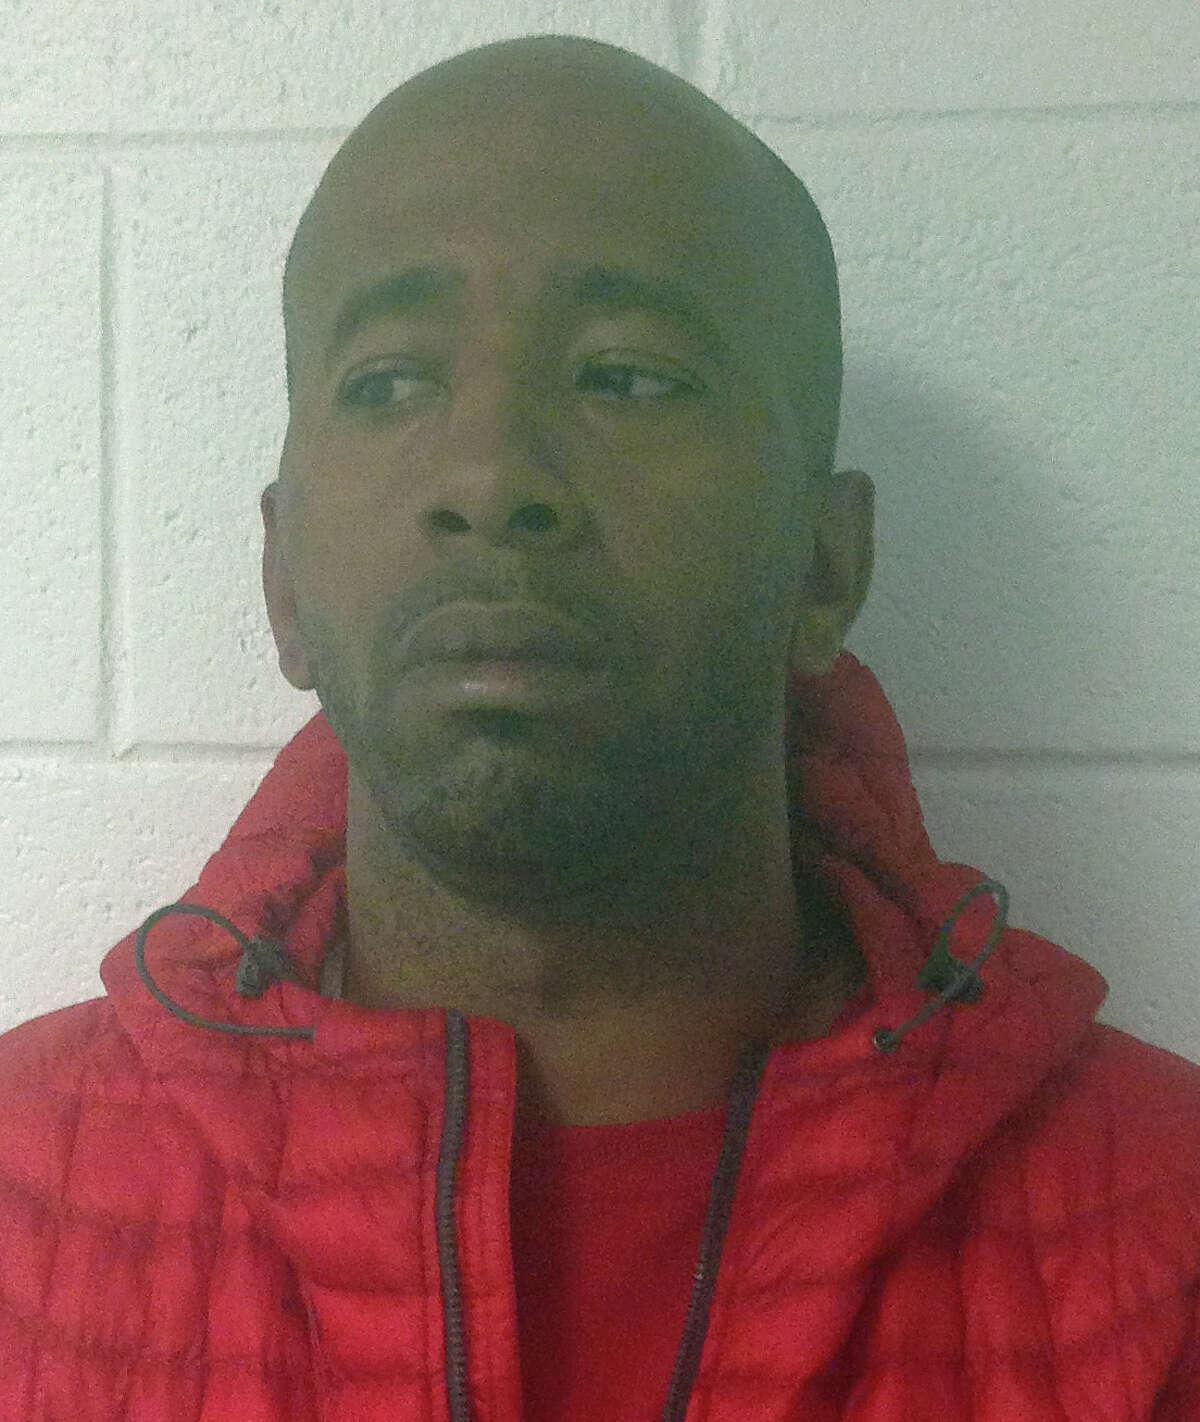 Michael Leonard Lundy, 41, of Raleigh, N.C. was the passenger inside the car that was chased by State Police on I-95 on May 4, 2016. He was charged with sale of a controlled substance and possession of narcotics. He was held on $250,000 bond.